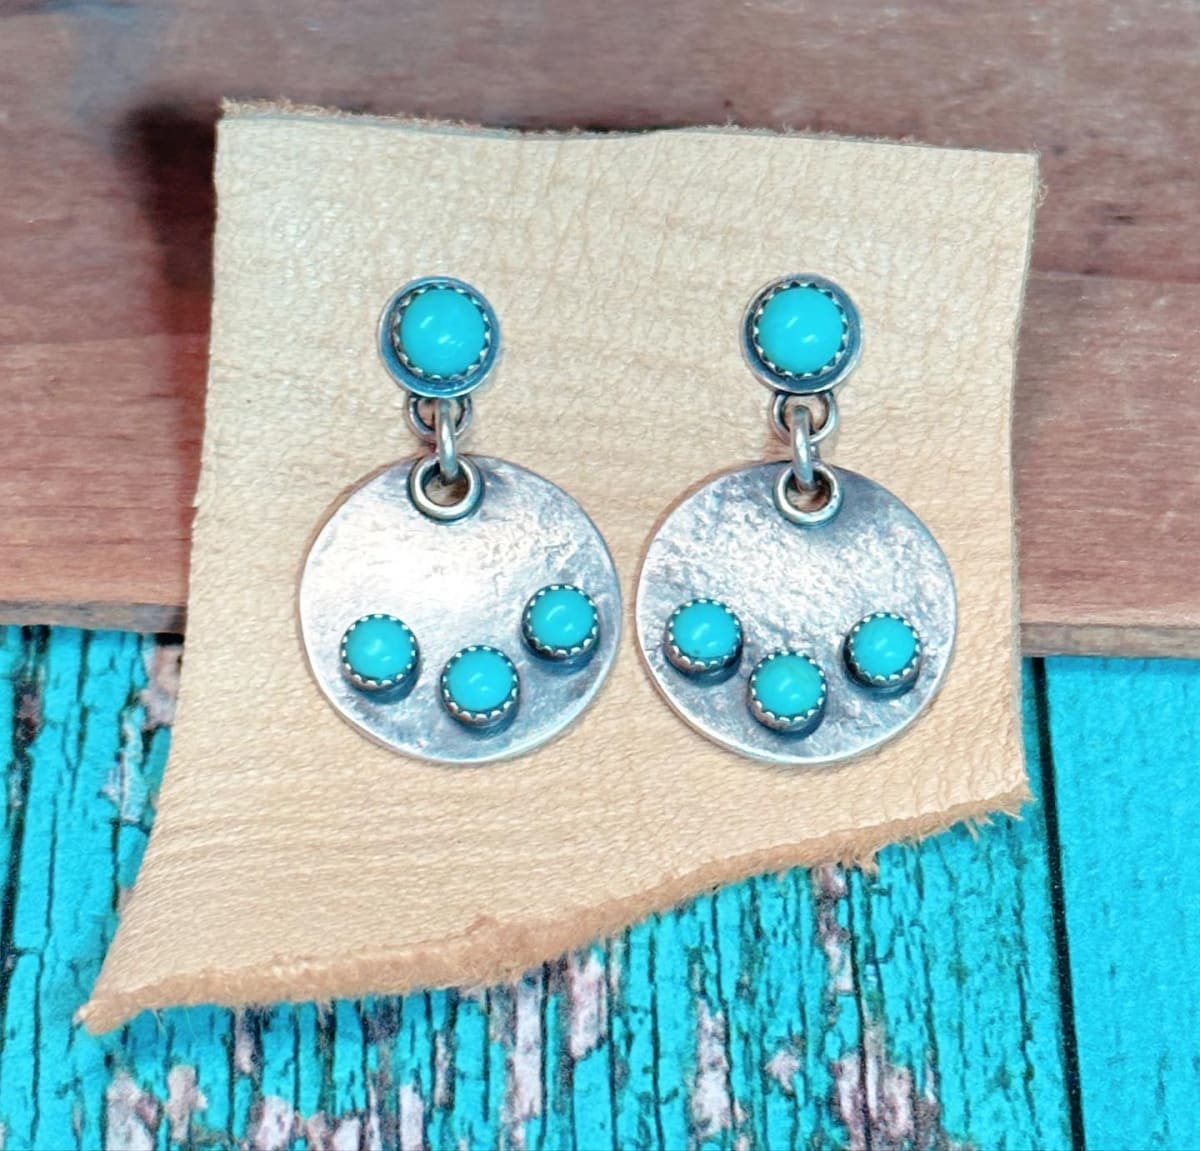 "Luna Earrings" - Sterling Silver and Kingman Turquoise Posts, Sawtooth Bezels by Shasta Brooks  Image: All Art © Shasta Brooks Studio LLC